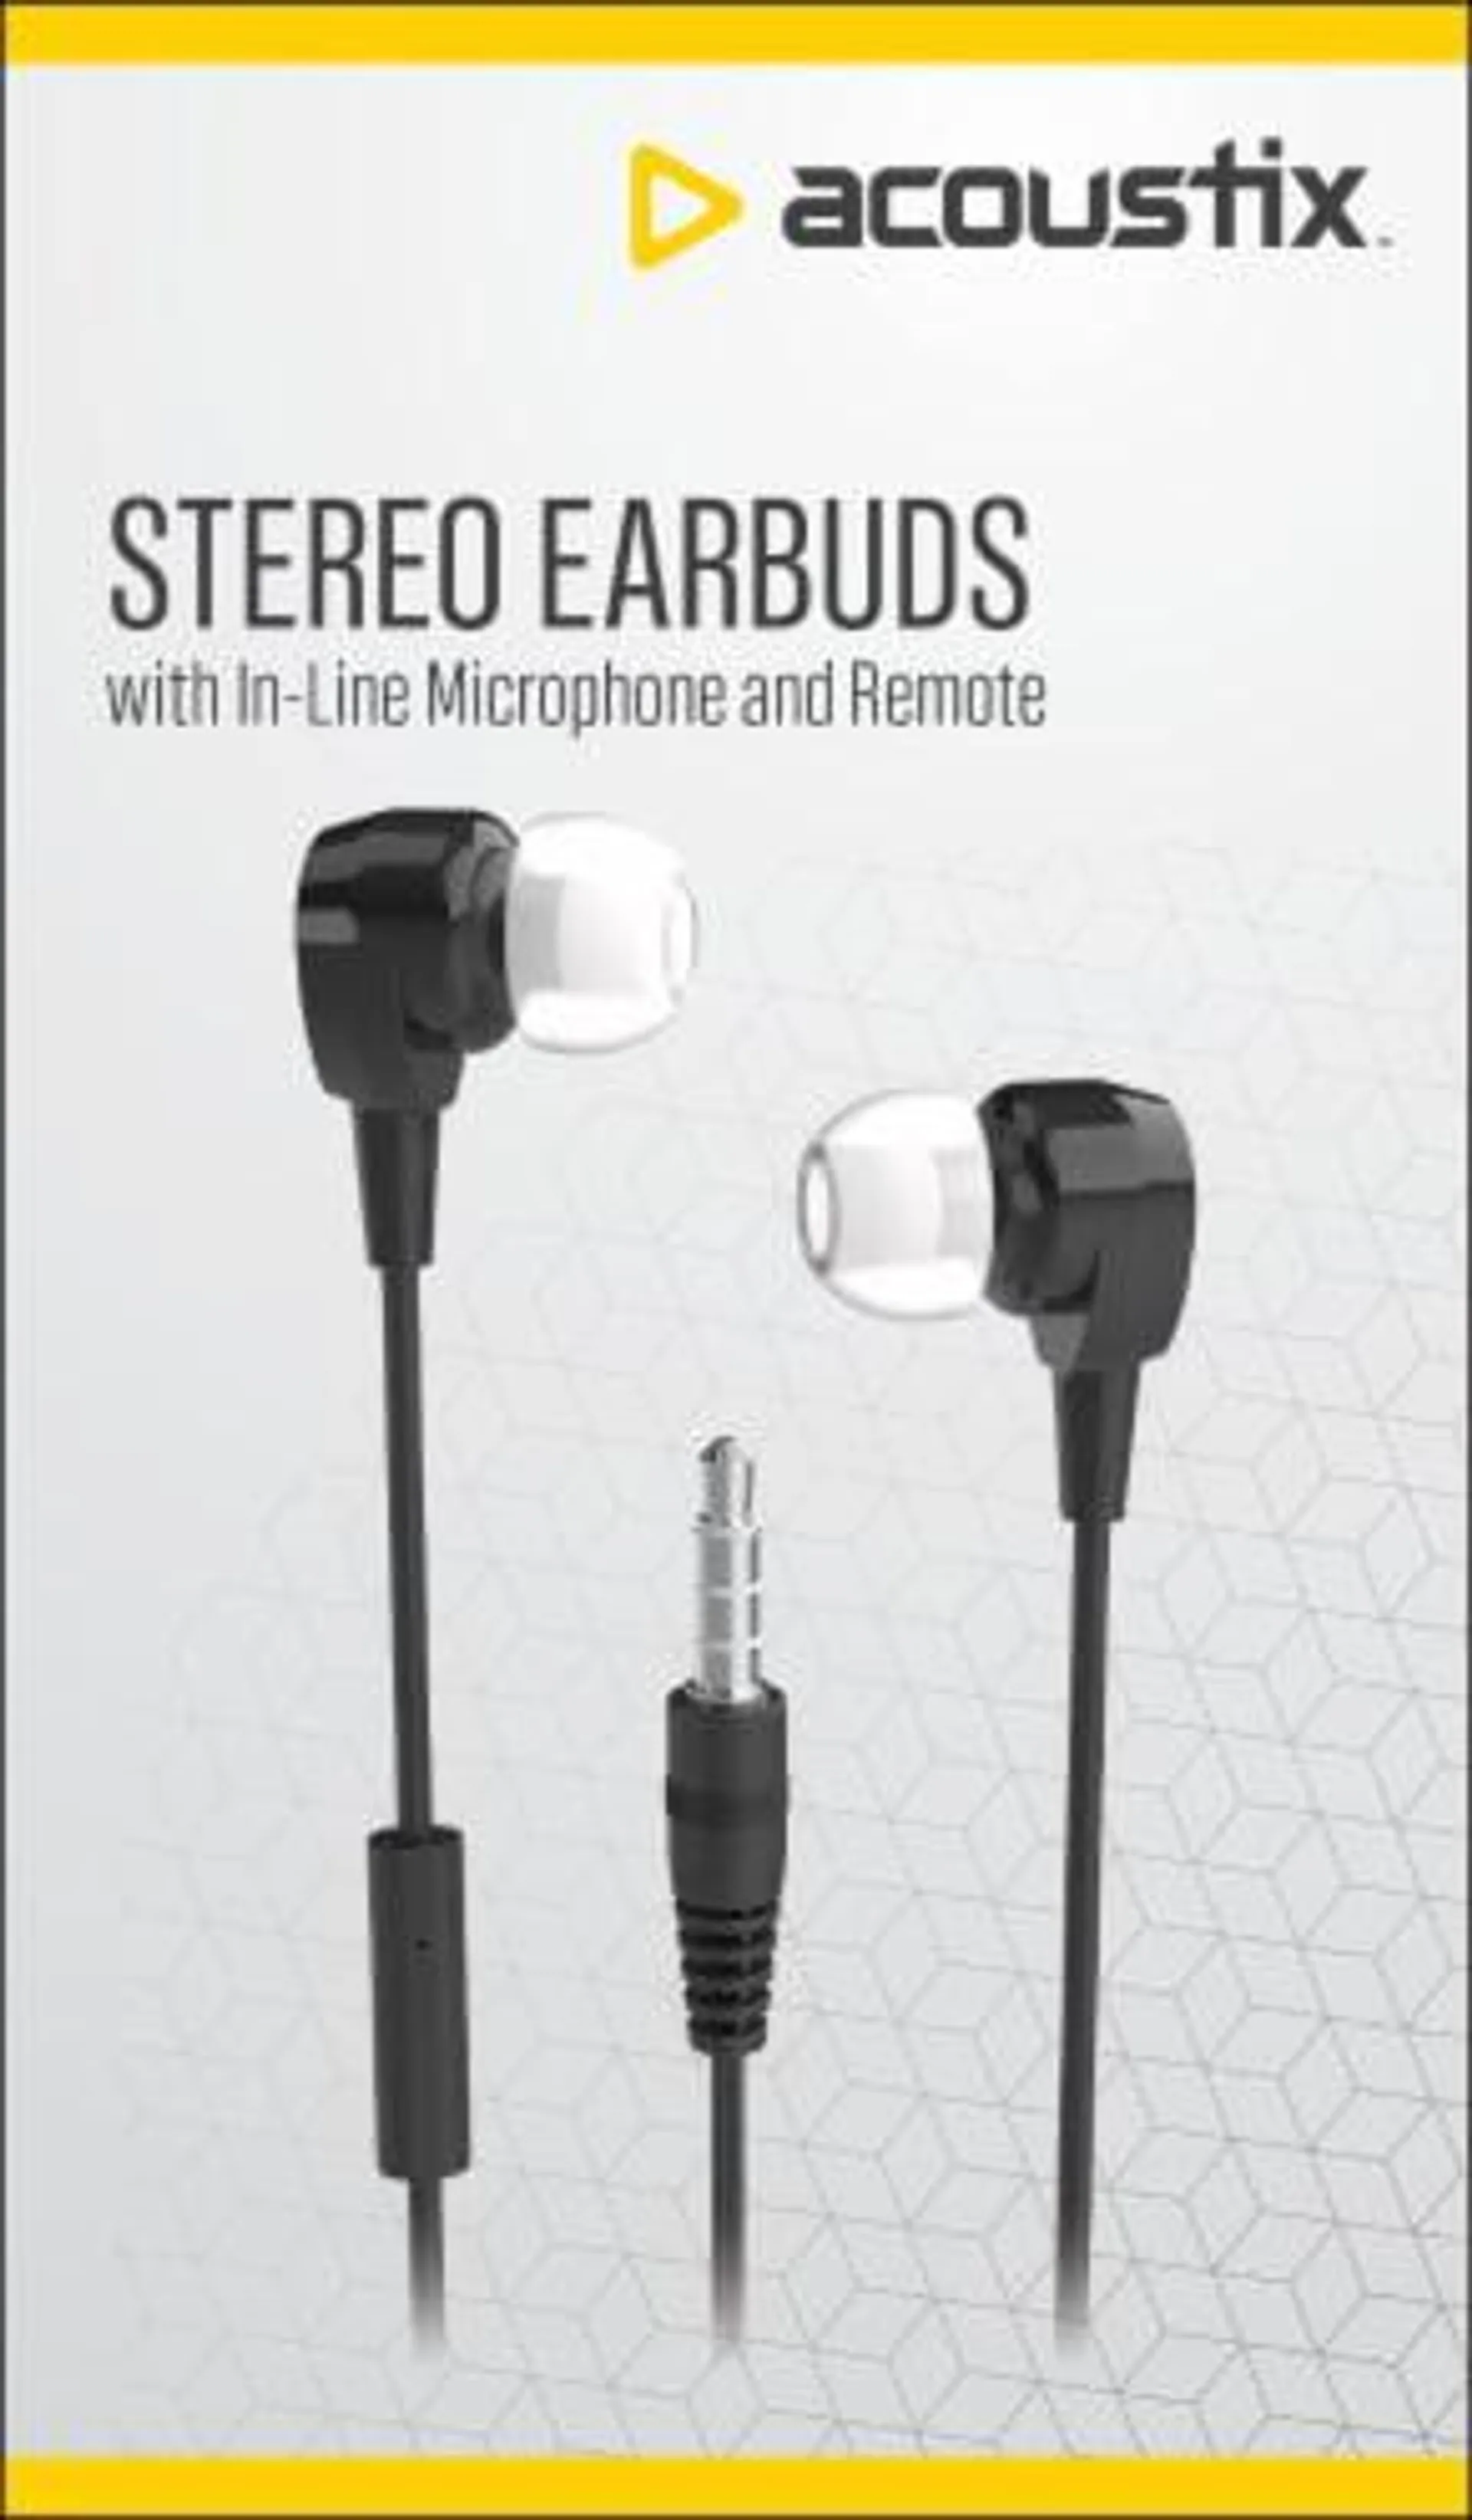 Acoustix Stereo Earbud Headphones with Microphone - Black